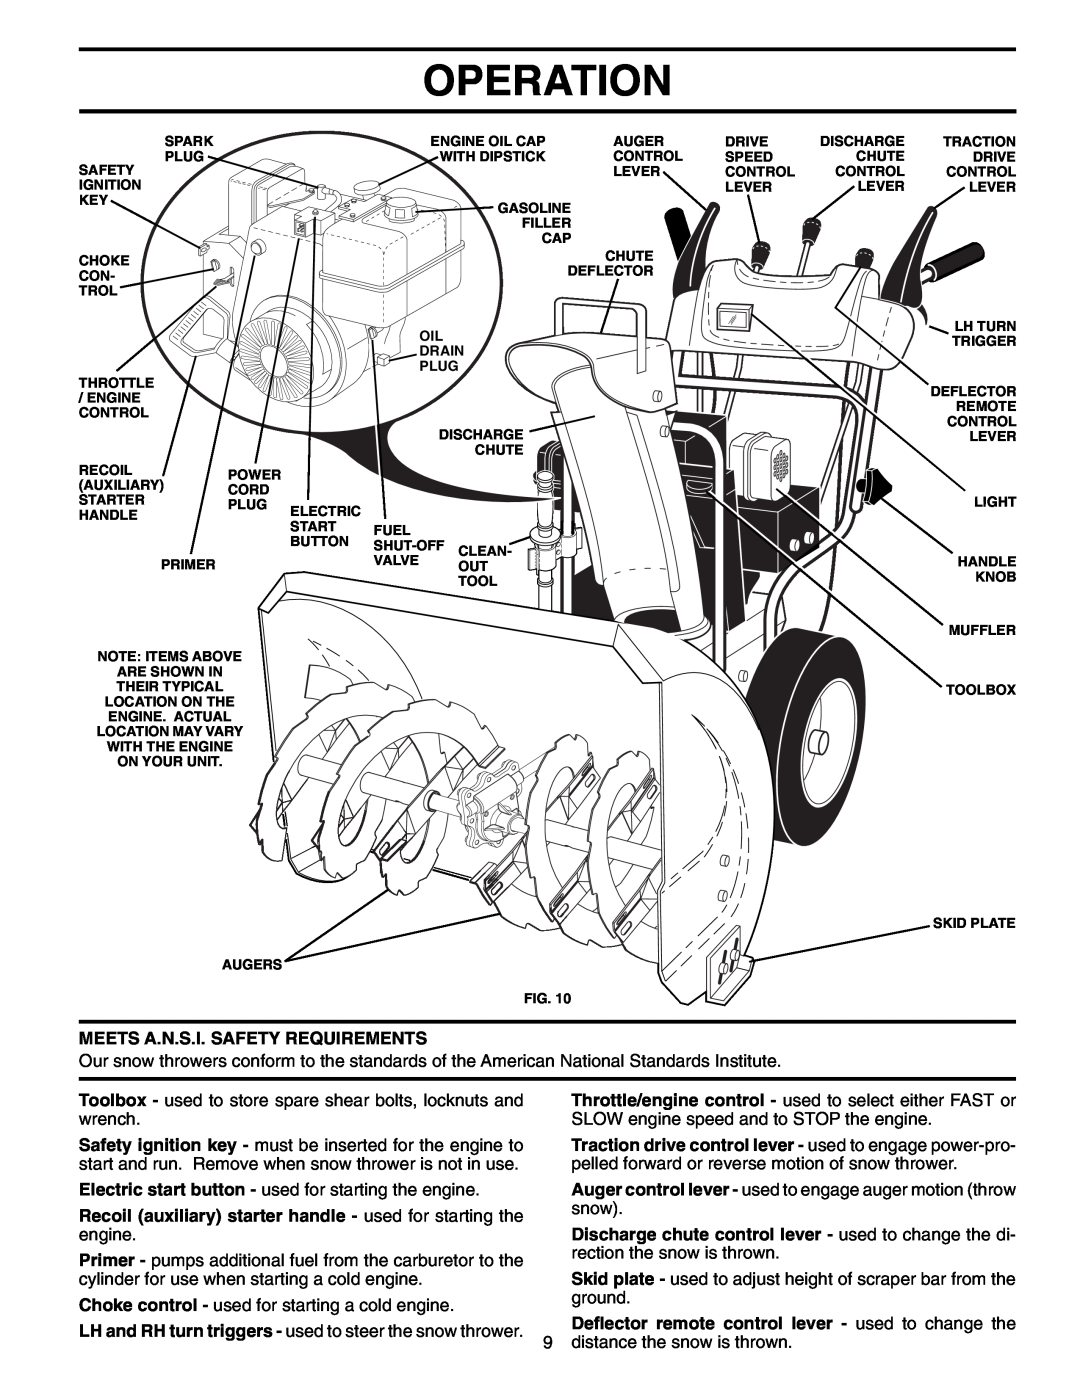 Poulan 199600 owner manual Operation, Meets A.N.S.I. Safety Requirements 